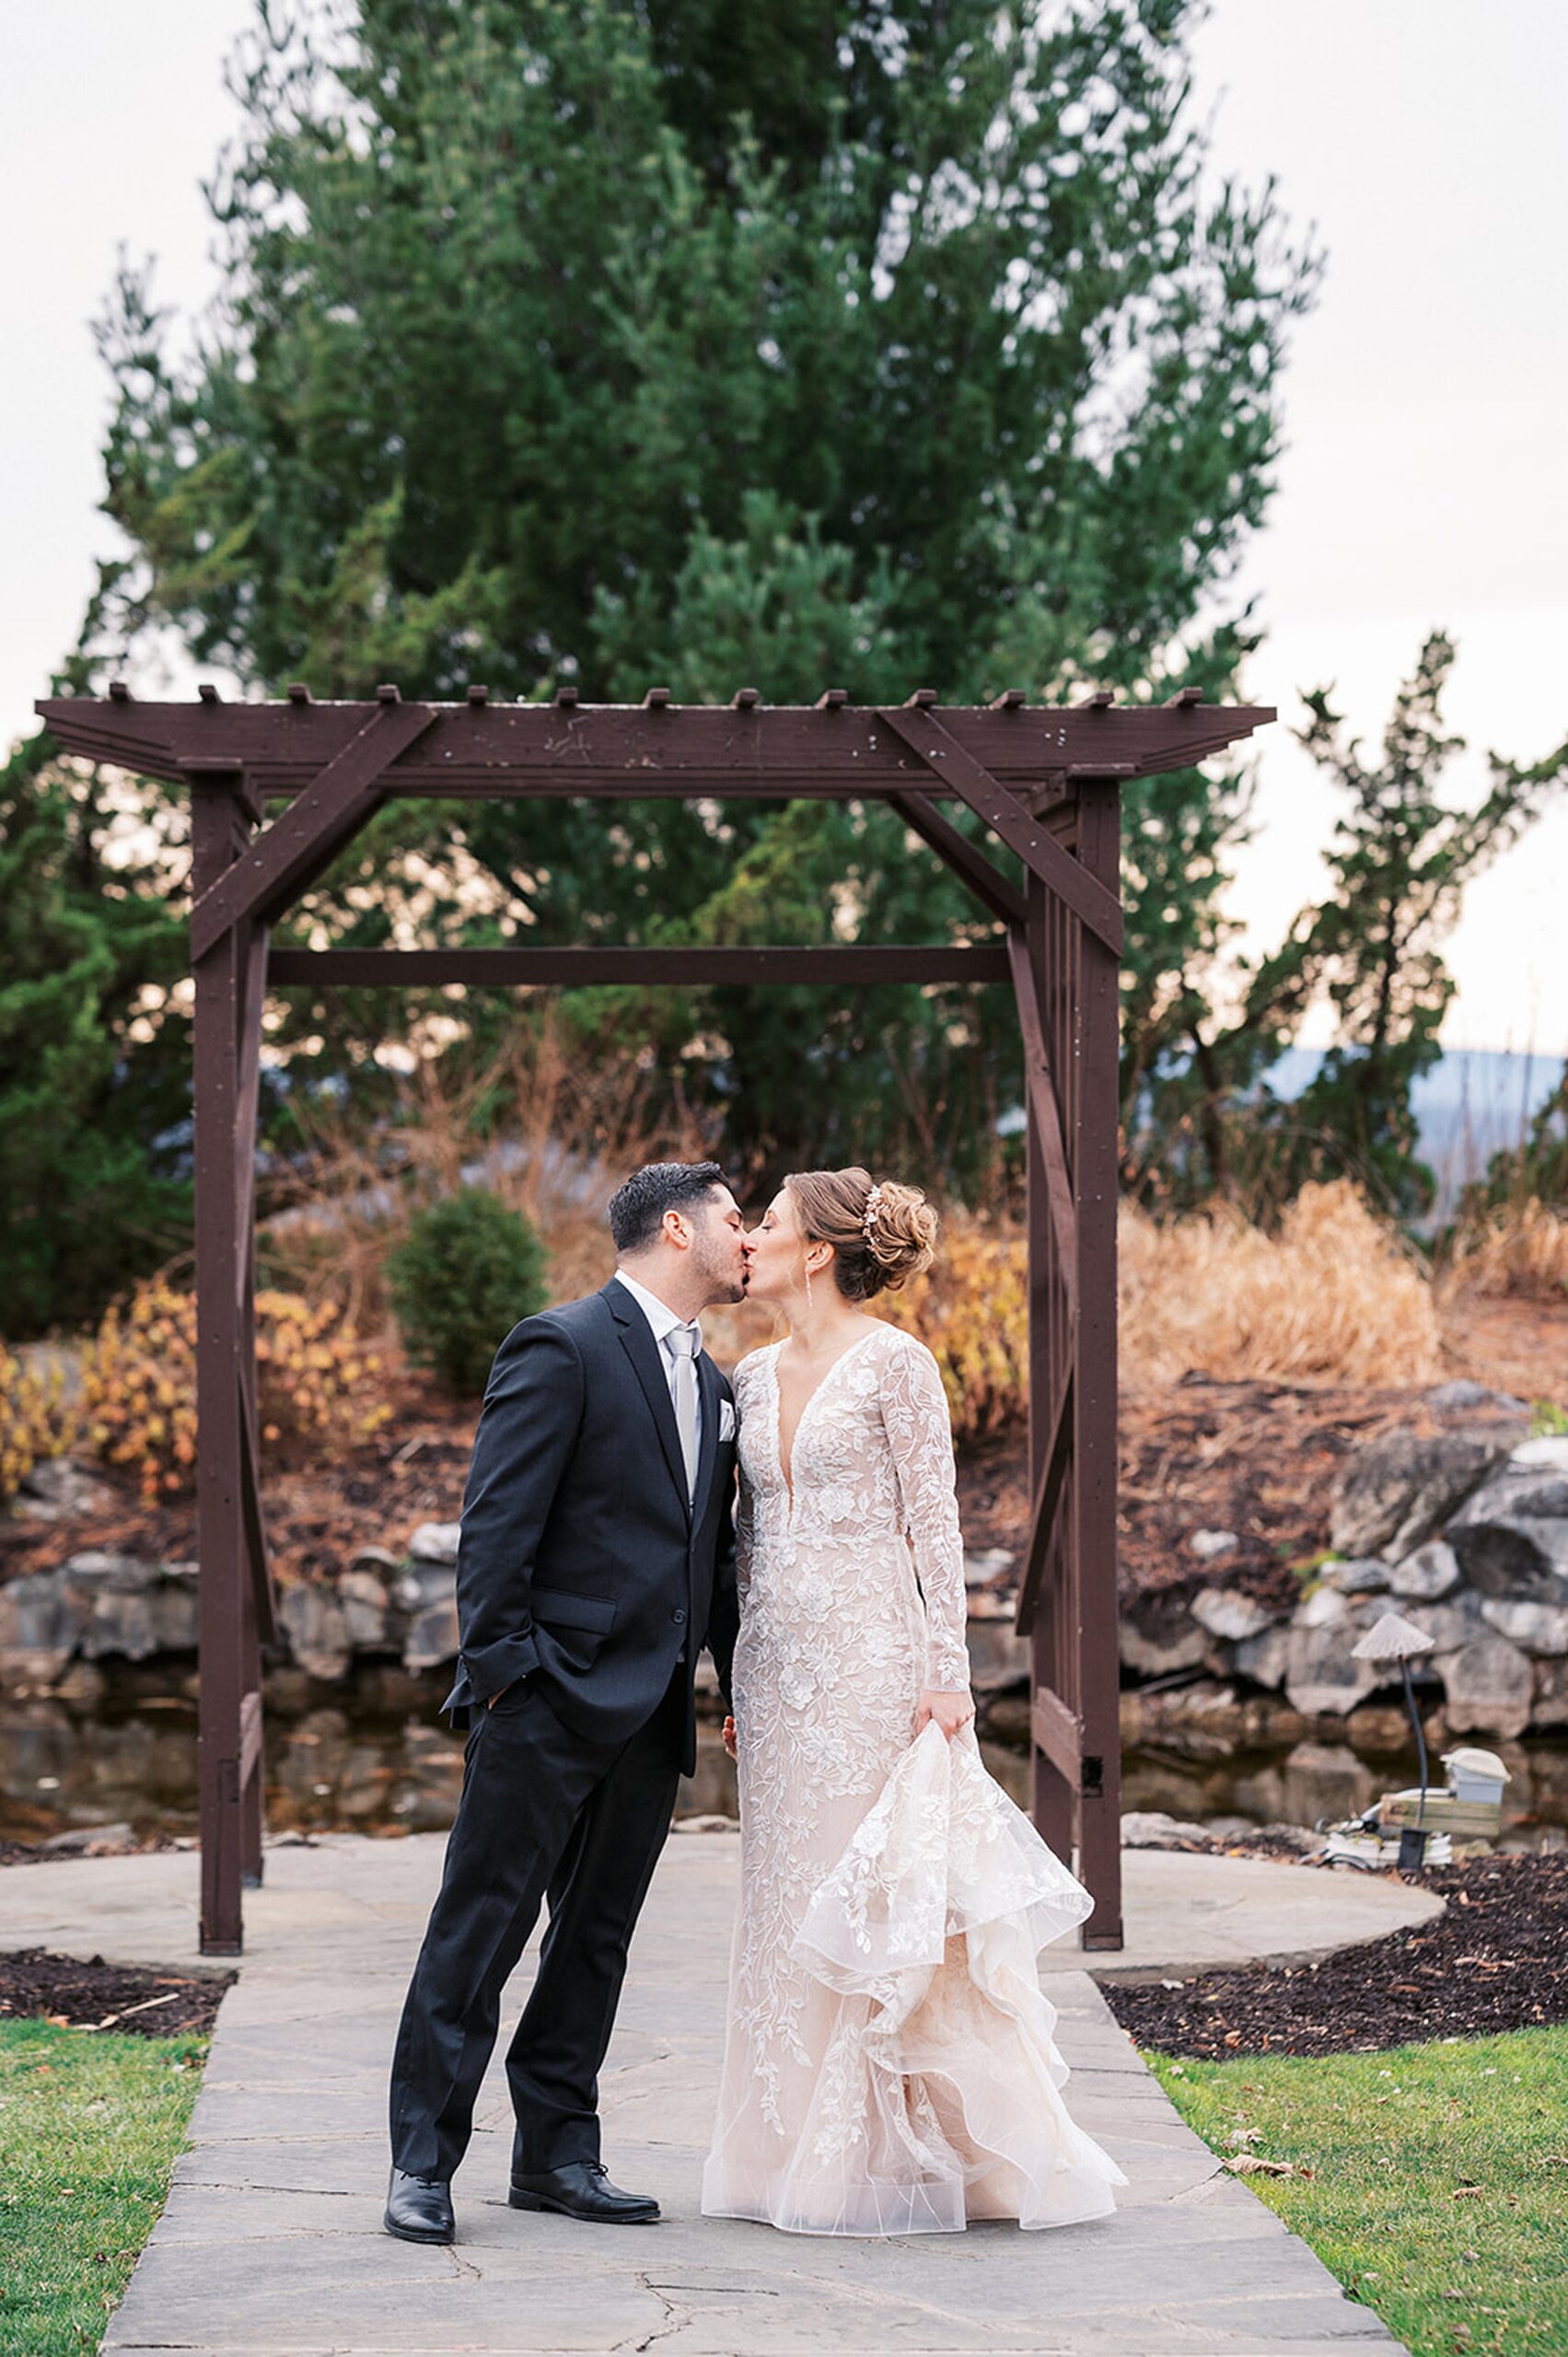 Newlyweds kiss and hold hands while standing under a wooden gazebo at a Crystal Springs Wedding